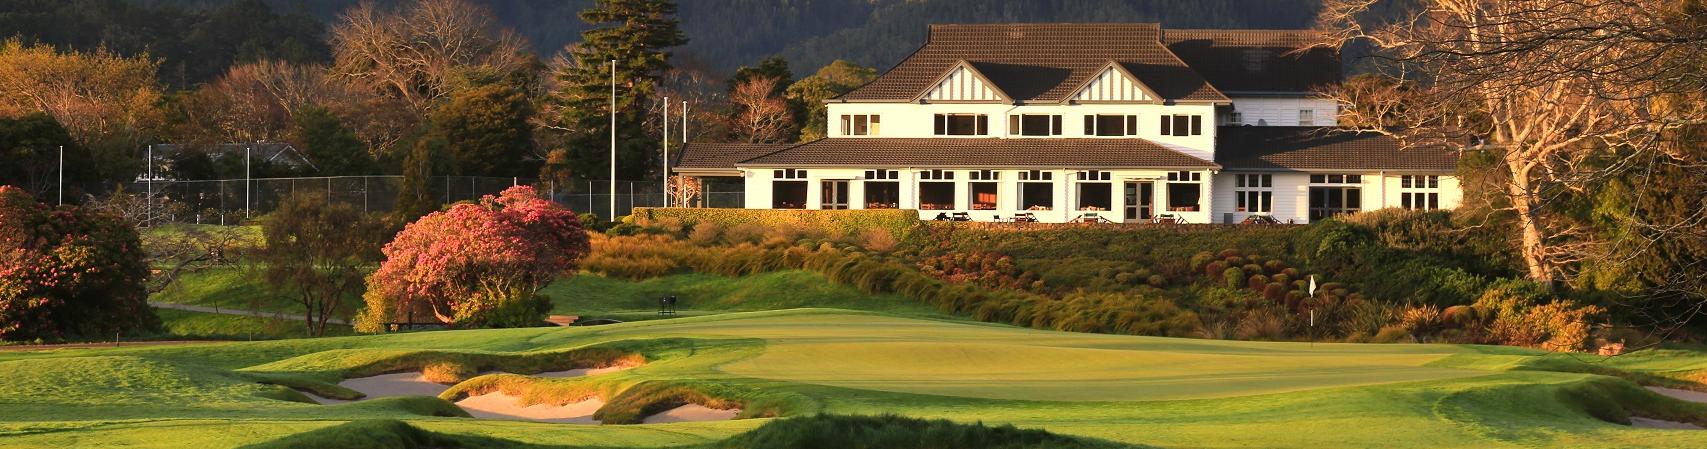 The 18th cropgreen at Royal Wellington sits in front of the clubhouse.